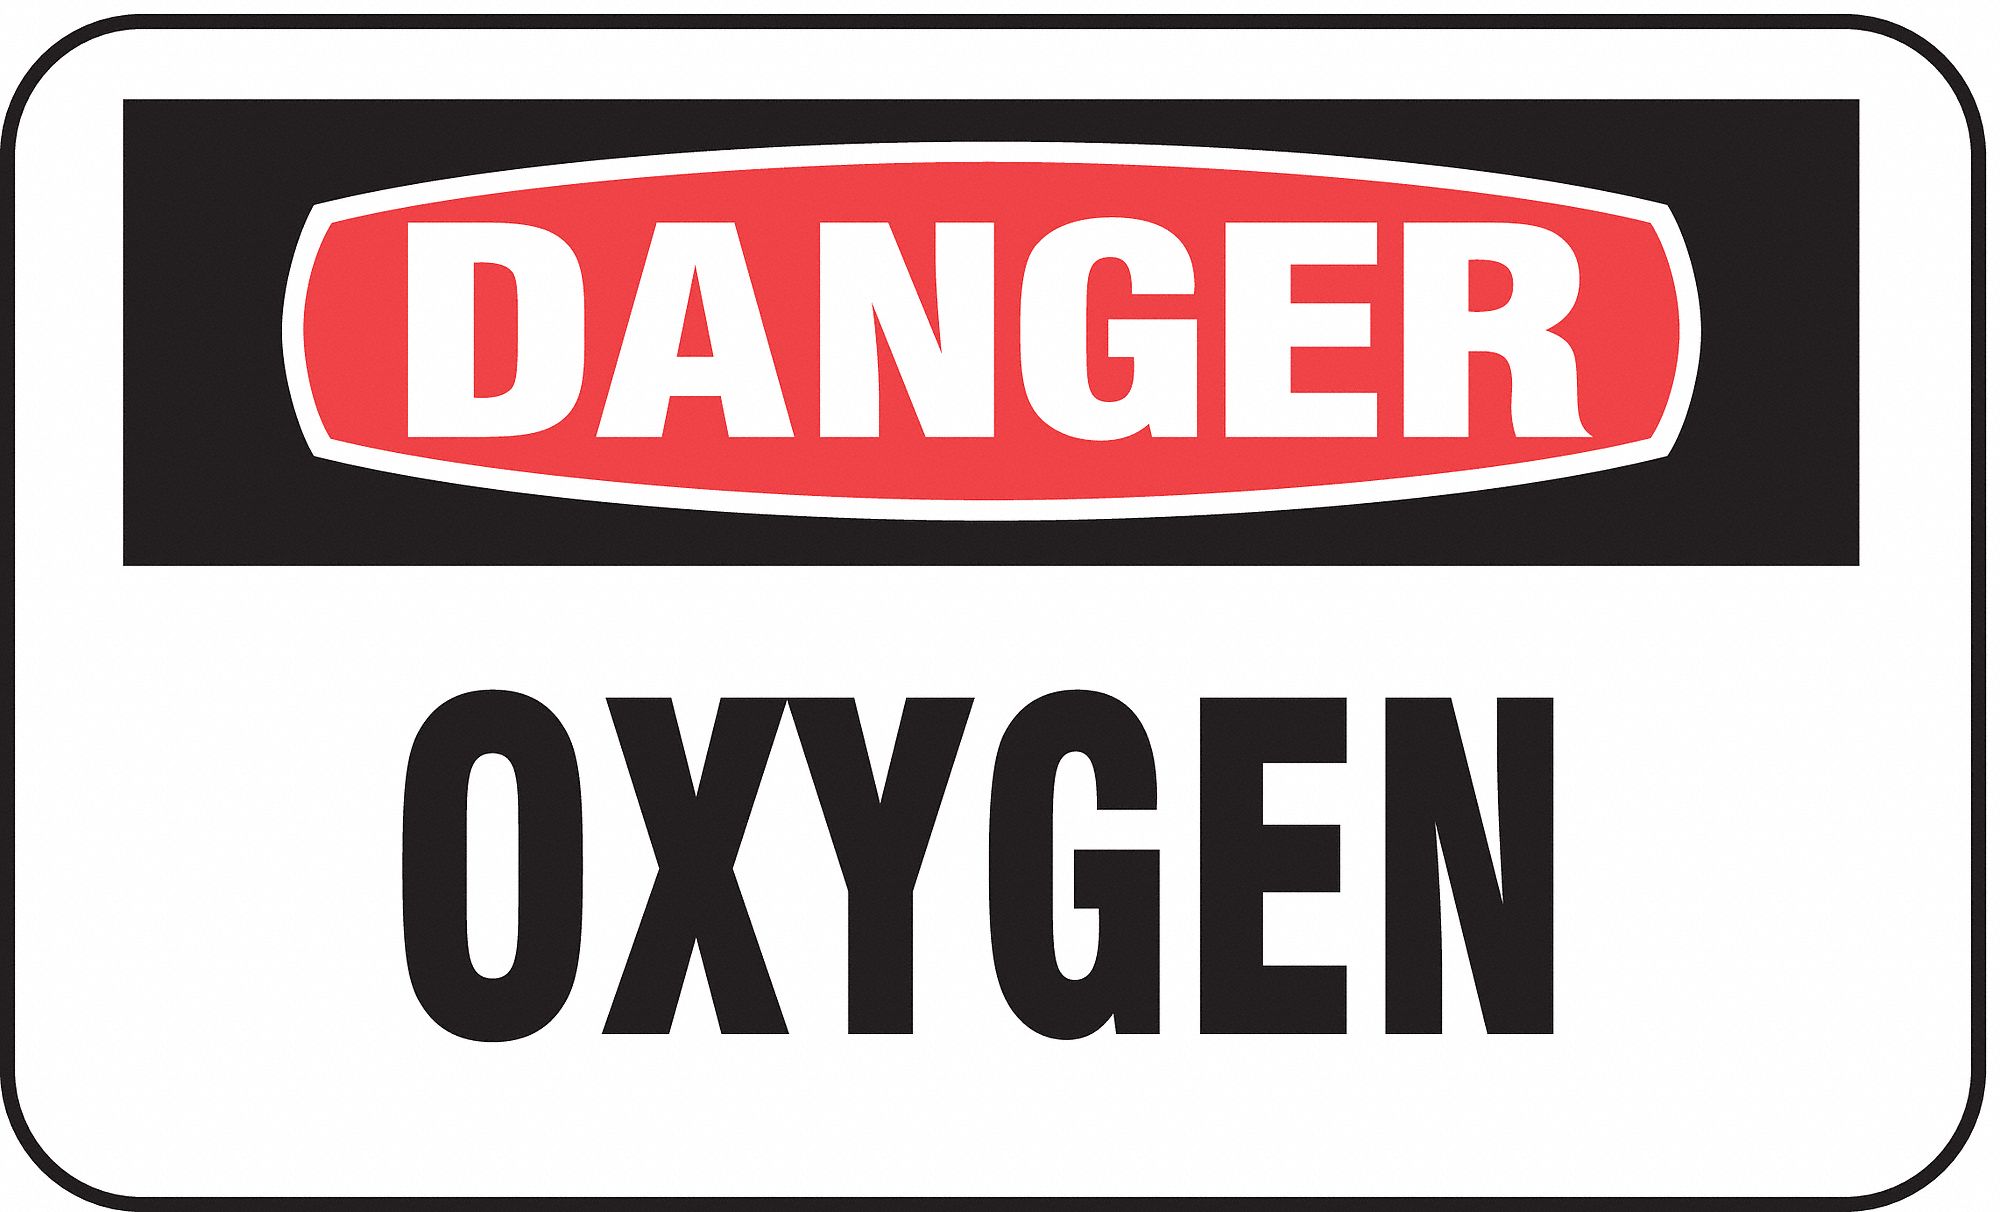 BRADY CYLINDER GAS LABELS OXYGEN - Safety, Facility and Grounds Signs ...